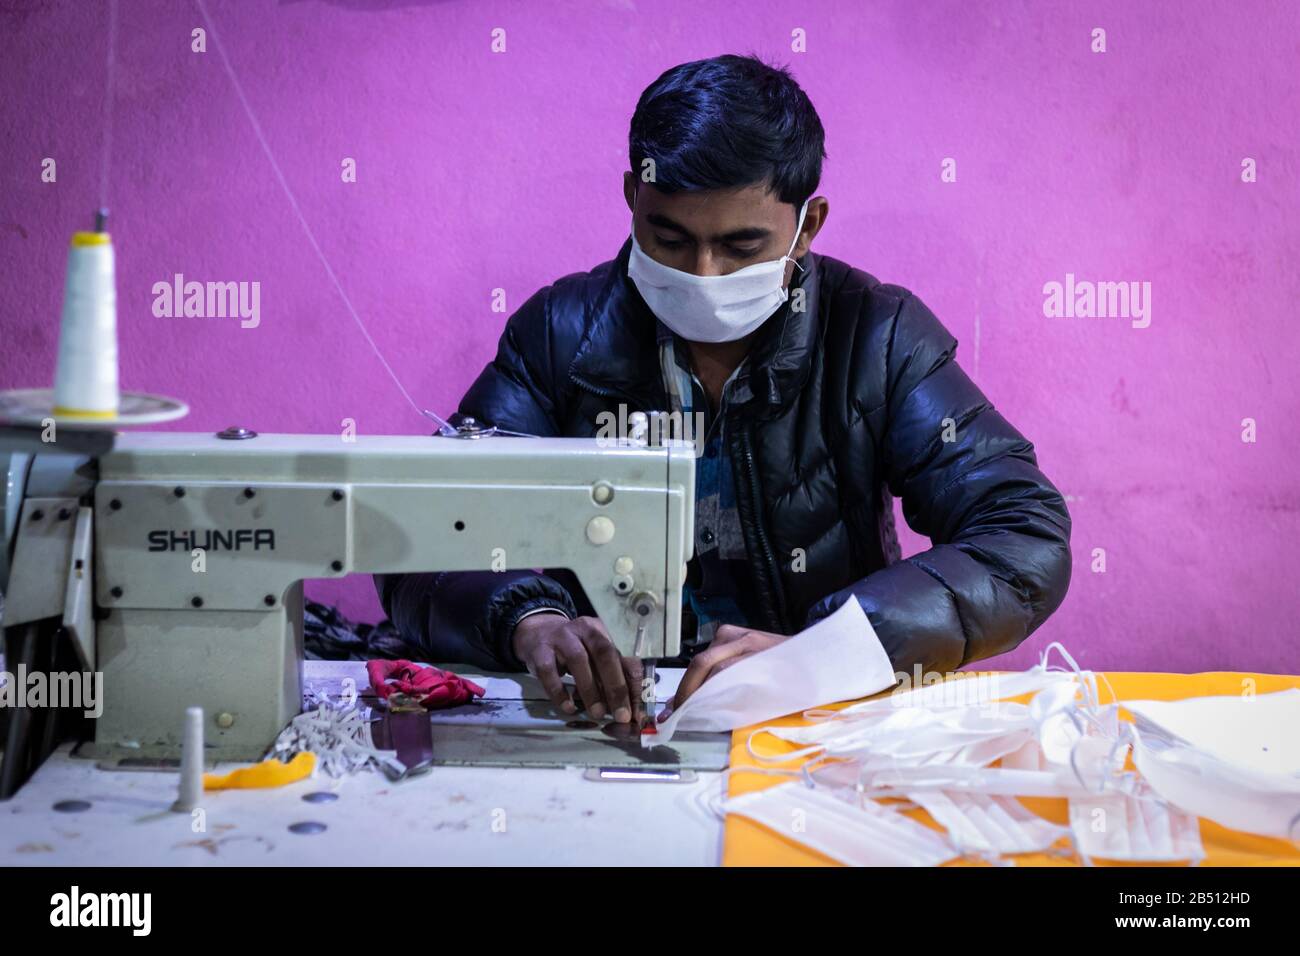 A factory worker making fabric face masks. Local factories are producing fabric mask to meet with demands as the COVID-19 coronavirus World Health Organisation (WHO) announced 98,192 people worldwide have been diagnosed with the corona virus (COVID-19) disease as of 6, March 2020. Stock Photo